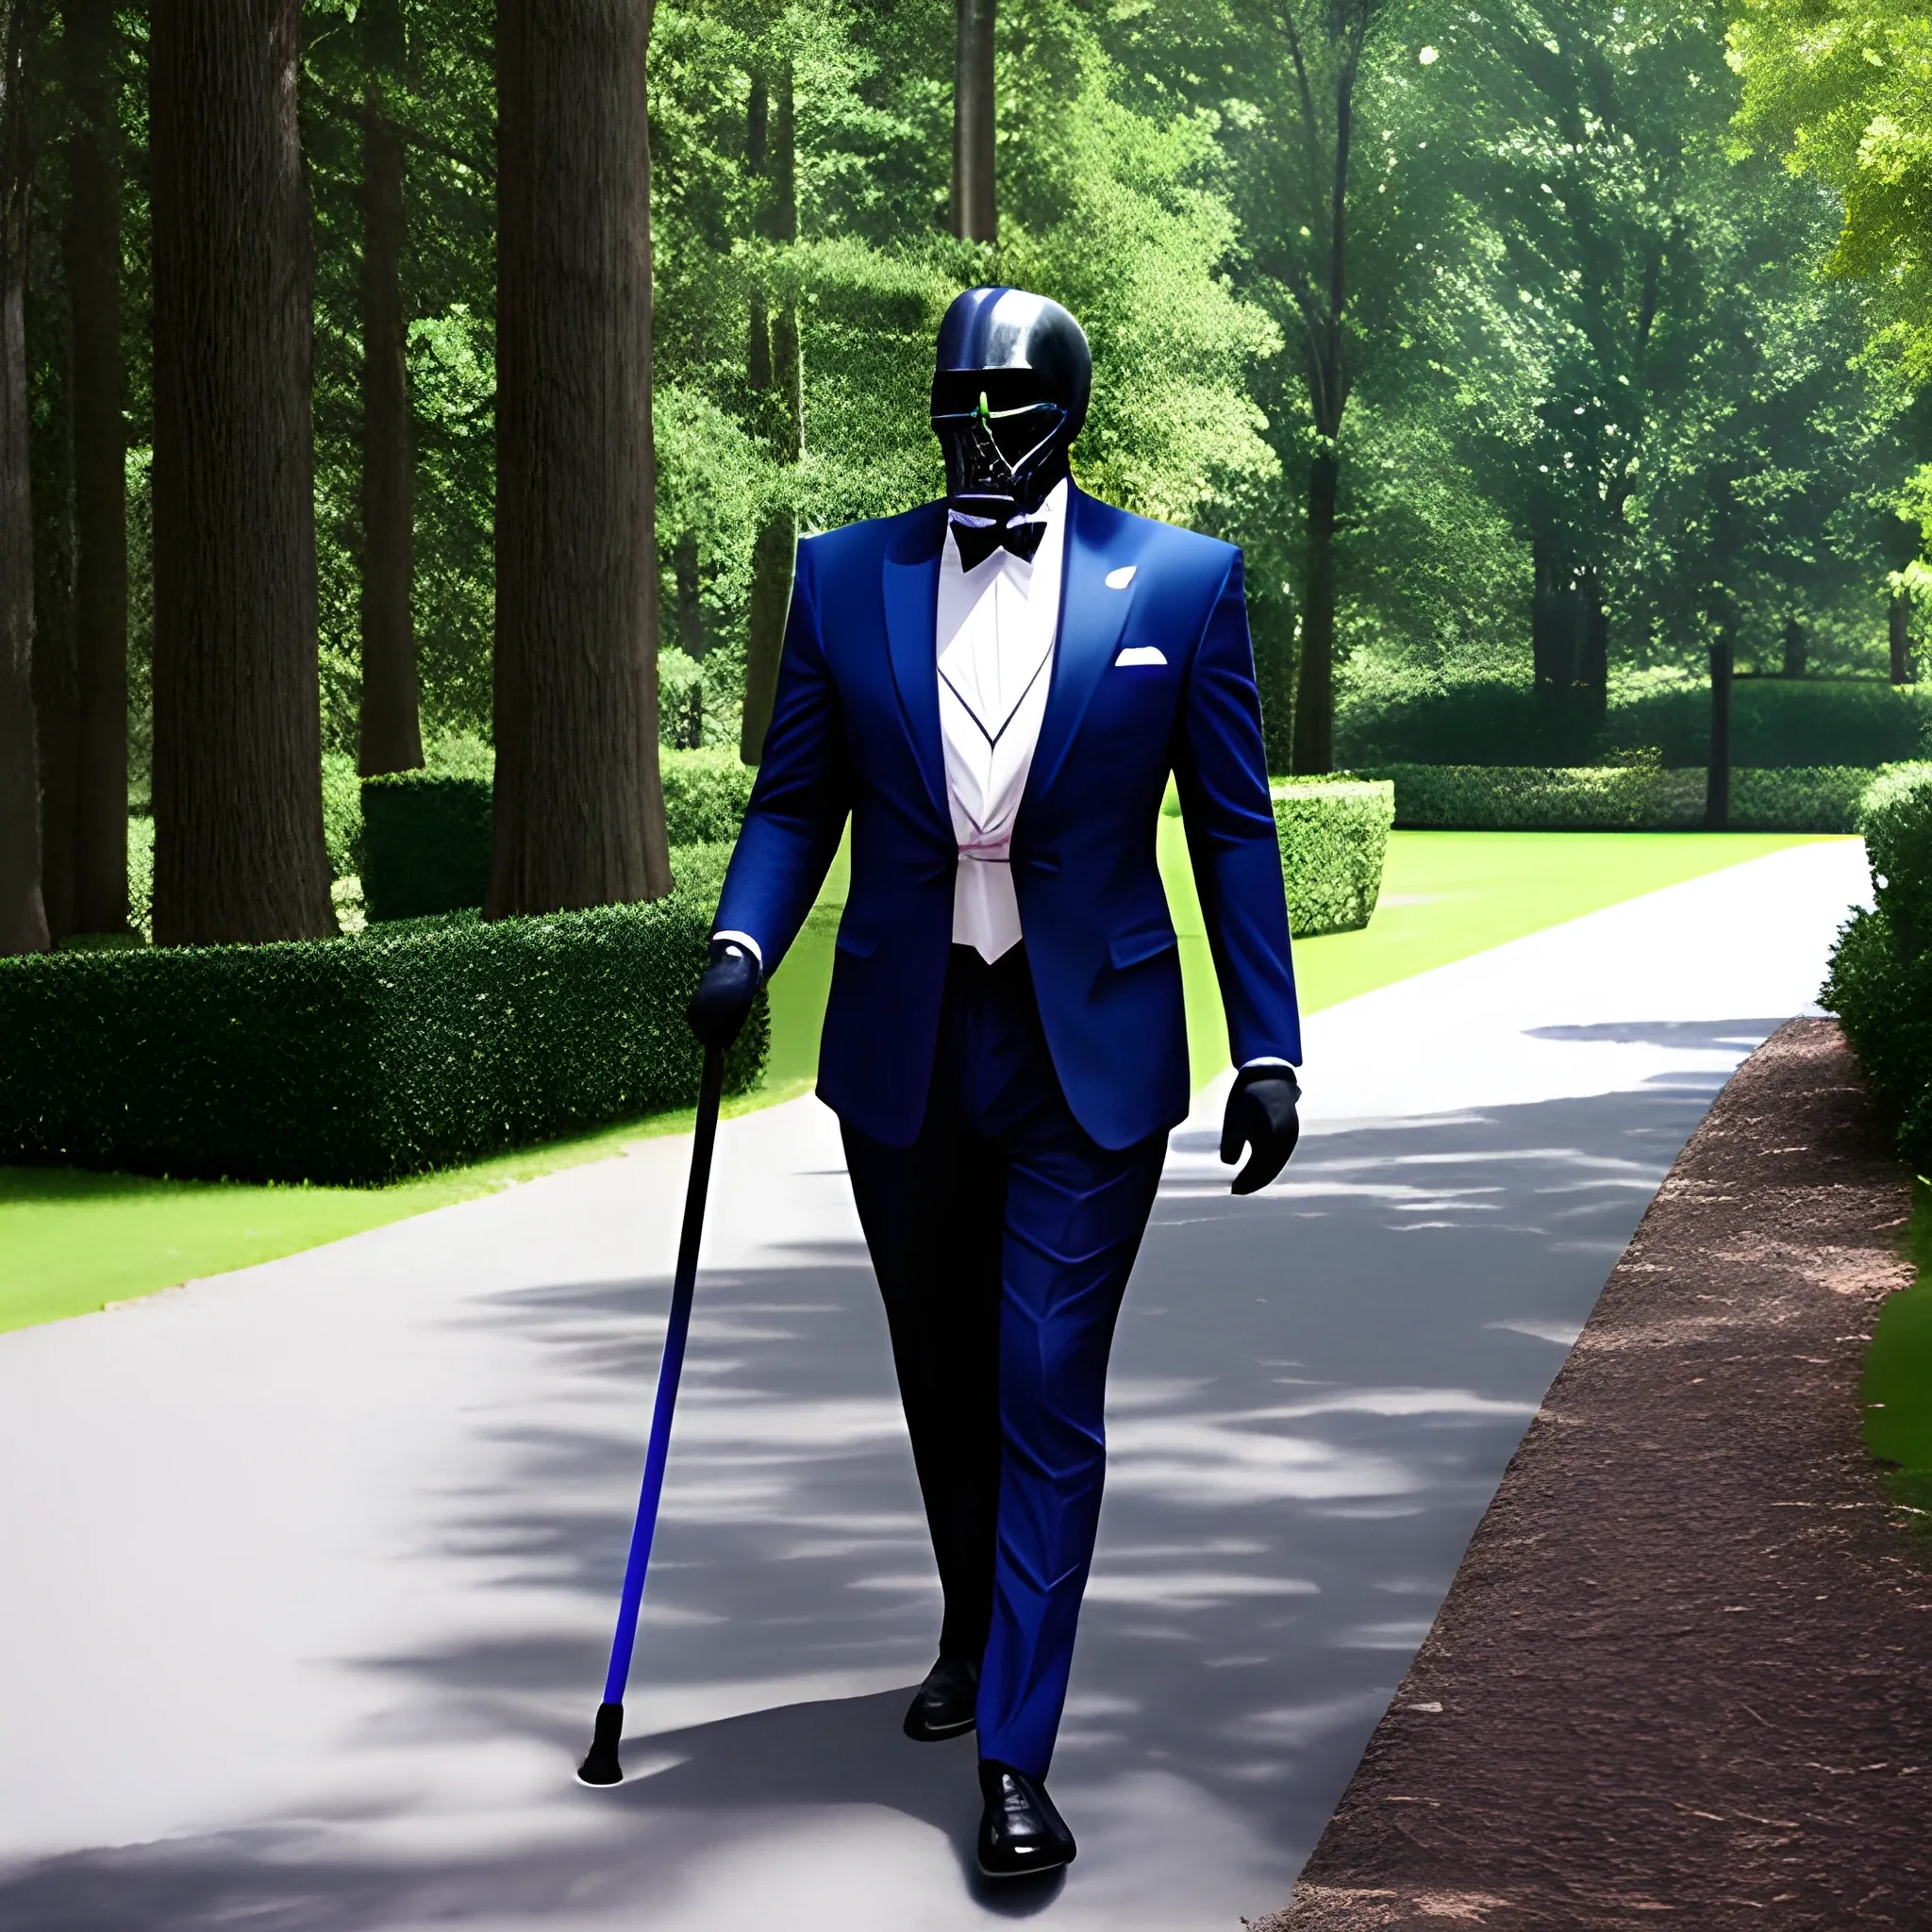 a dark vader man in a blue suit, a dark vader woman in a pink suit, a dark vader child in shorts and an old dark vader with a walking stick in a picnic